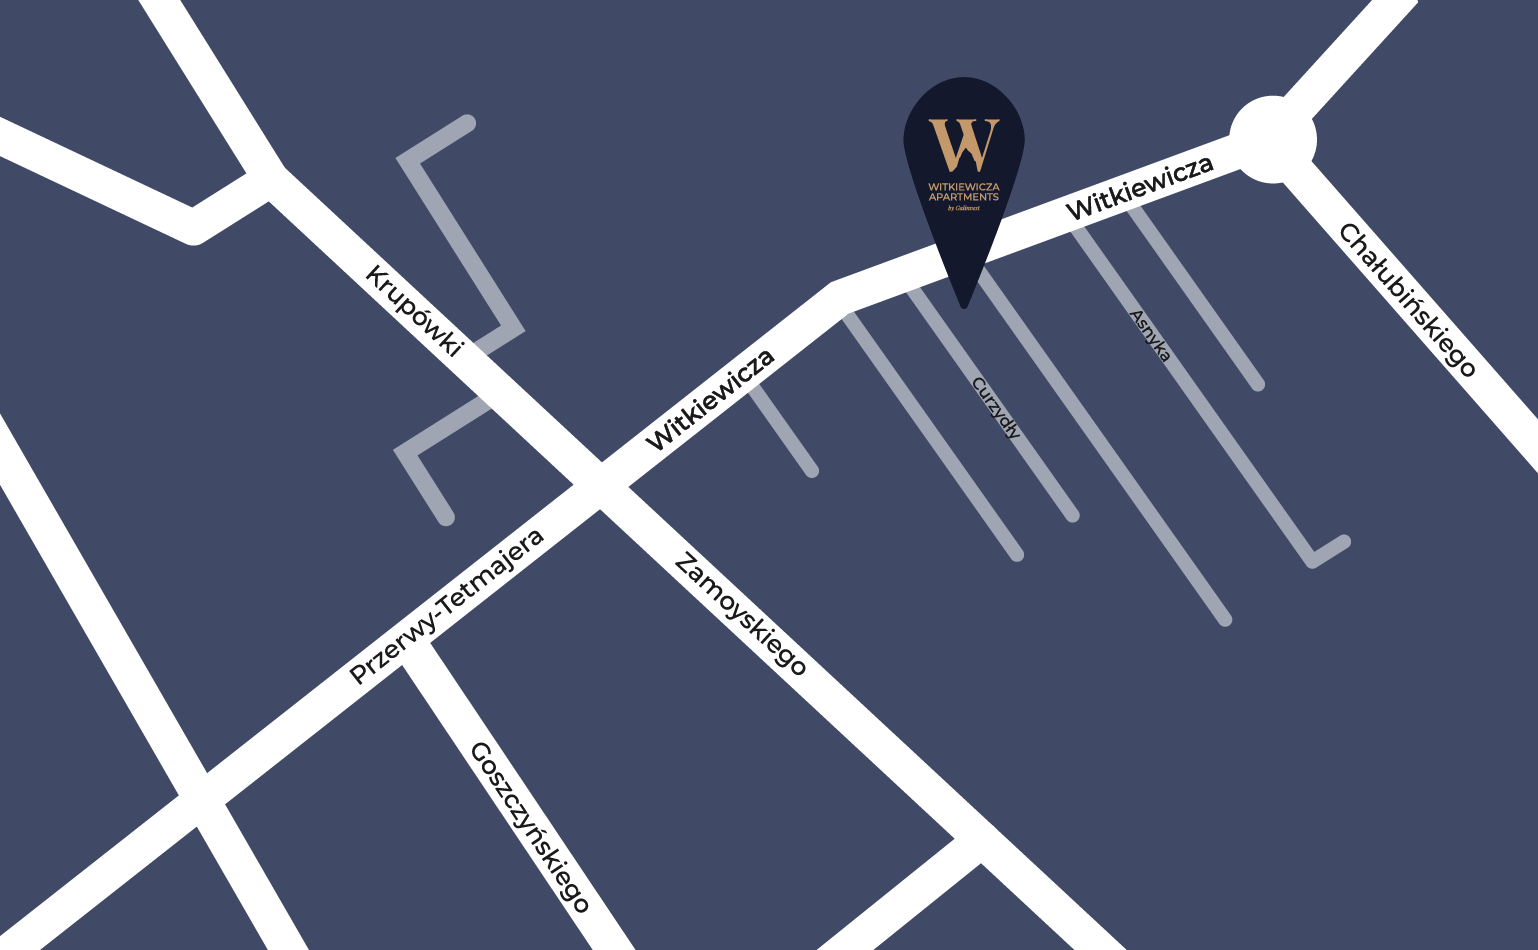 https://witkiewicza10a.pl/wp-content/uploads/2023/02/WitkiewiczaApartments_mapka.png